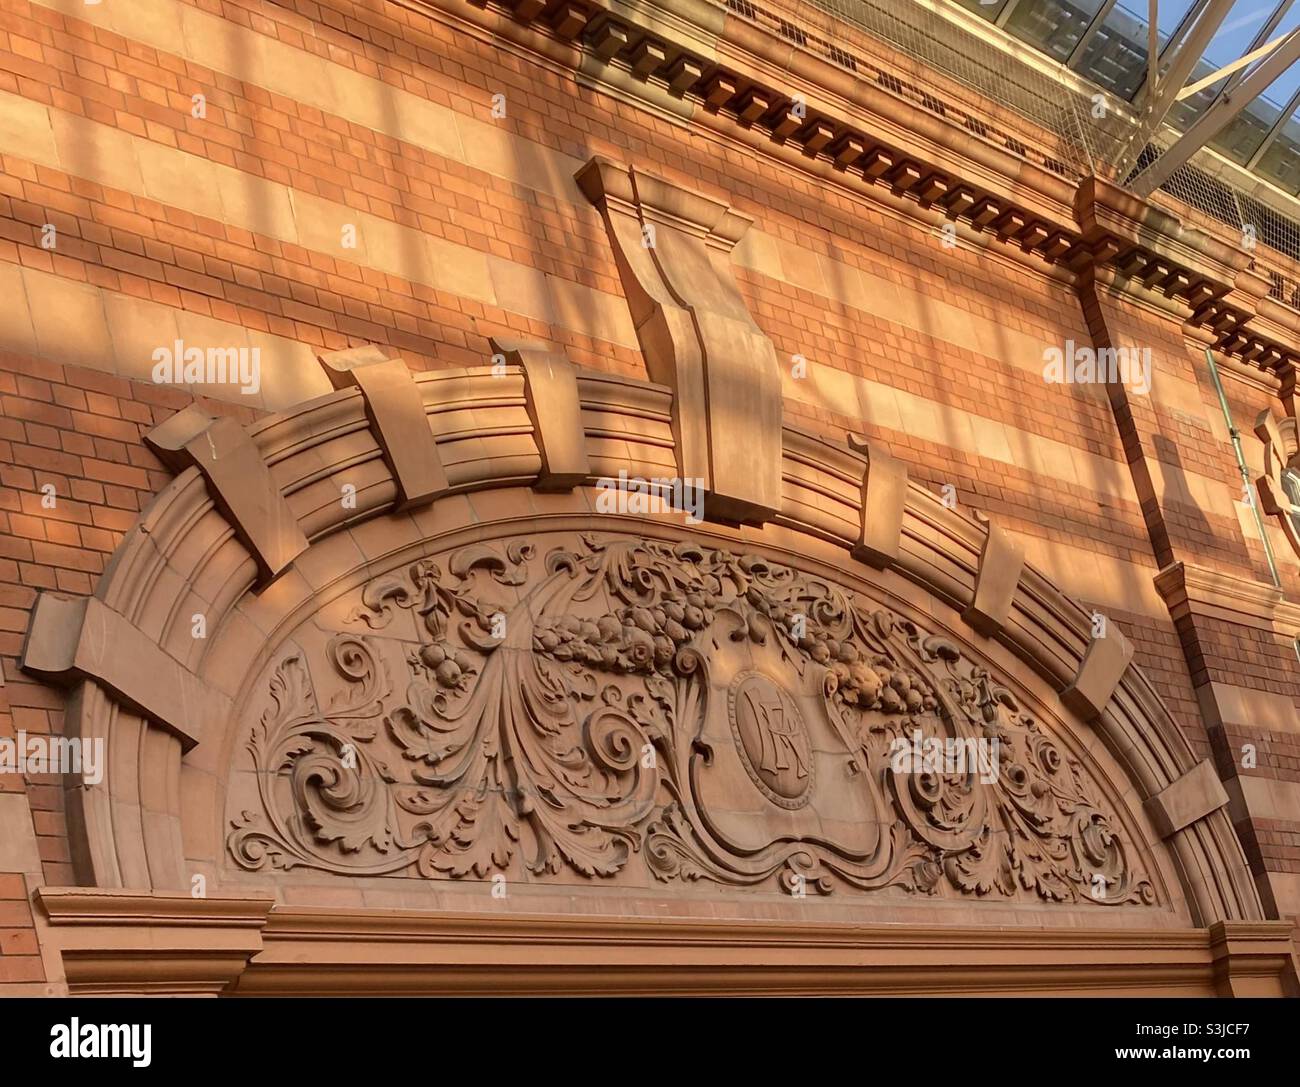 Architectural decoration on the concourse of Nottingham Railway Station, an ‘Edwardian Baroque Revival style’ building using red brick, terracotta and faience.Opened in 1848, it was rebuilt in 1904. Stock Photo